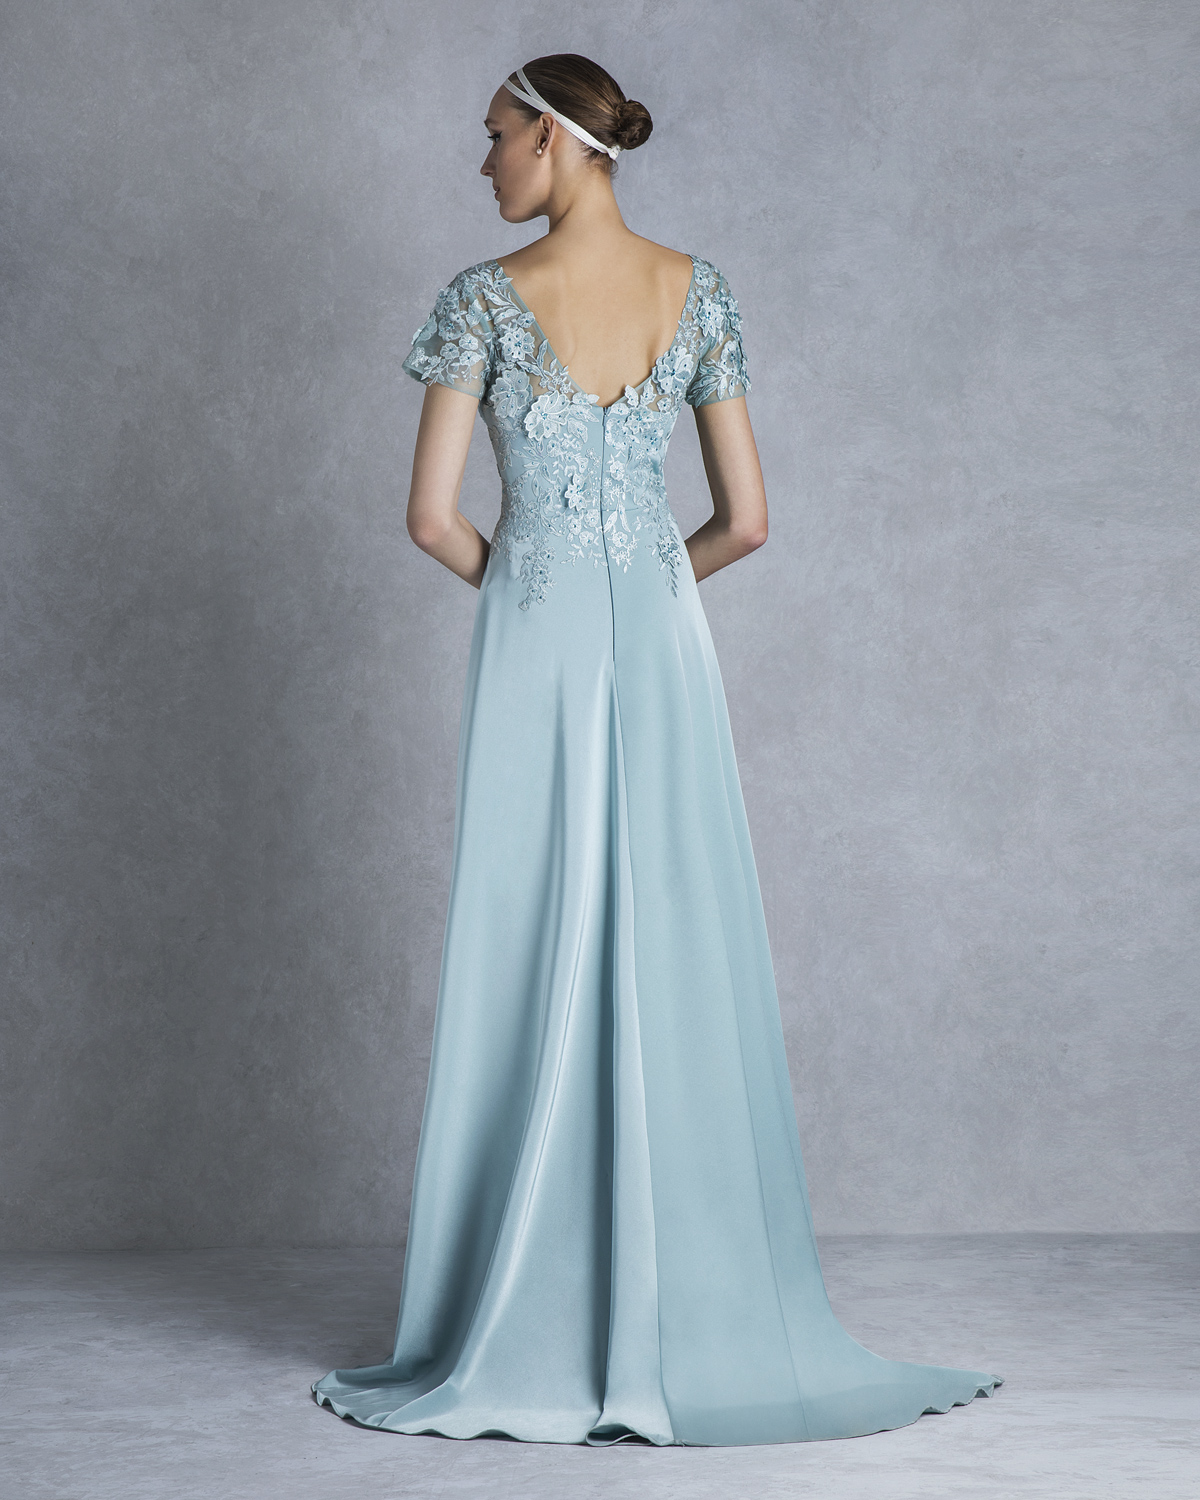 Classic Dresses / Long evening dress with lace for the mother of the bride